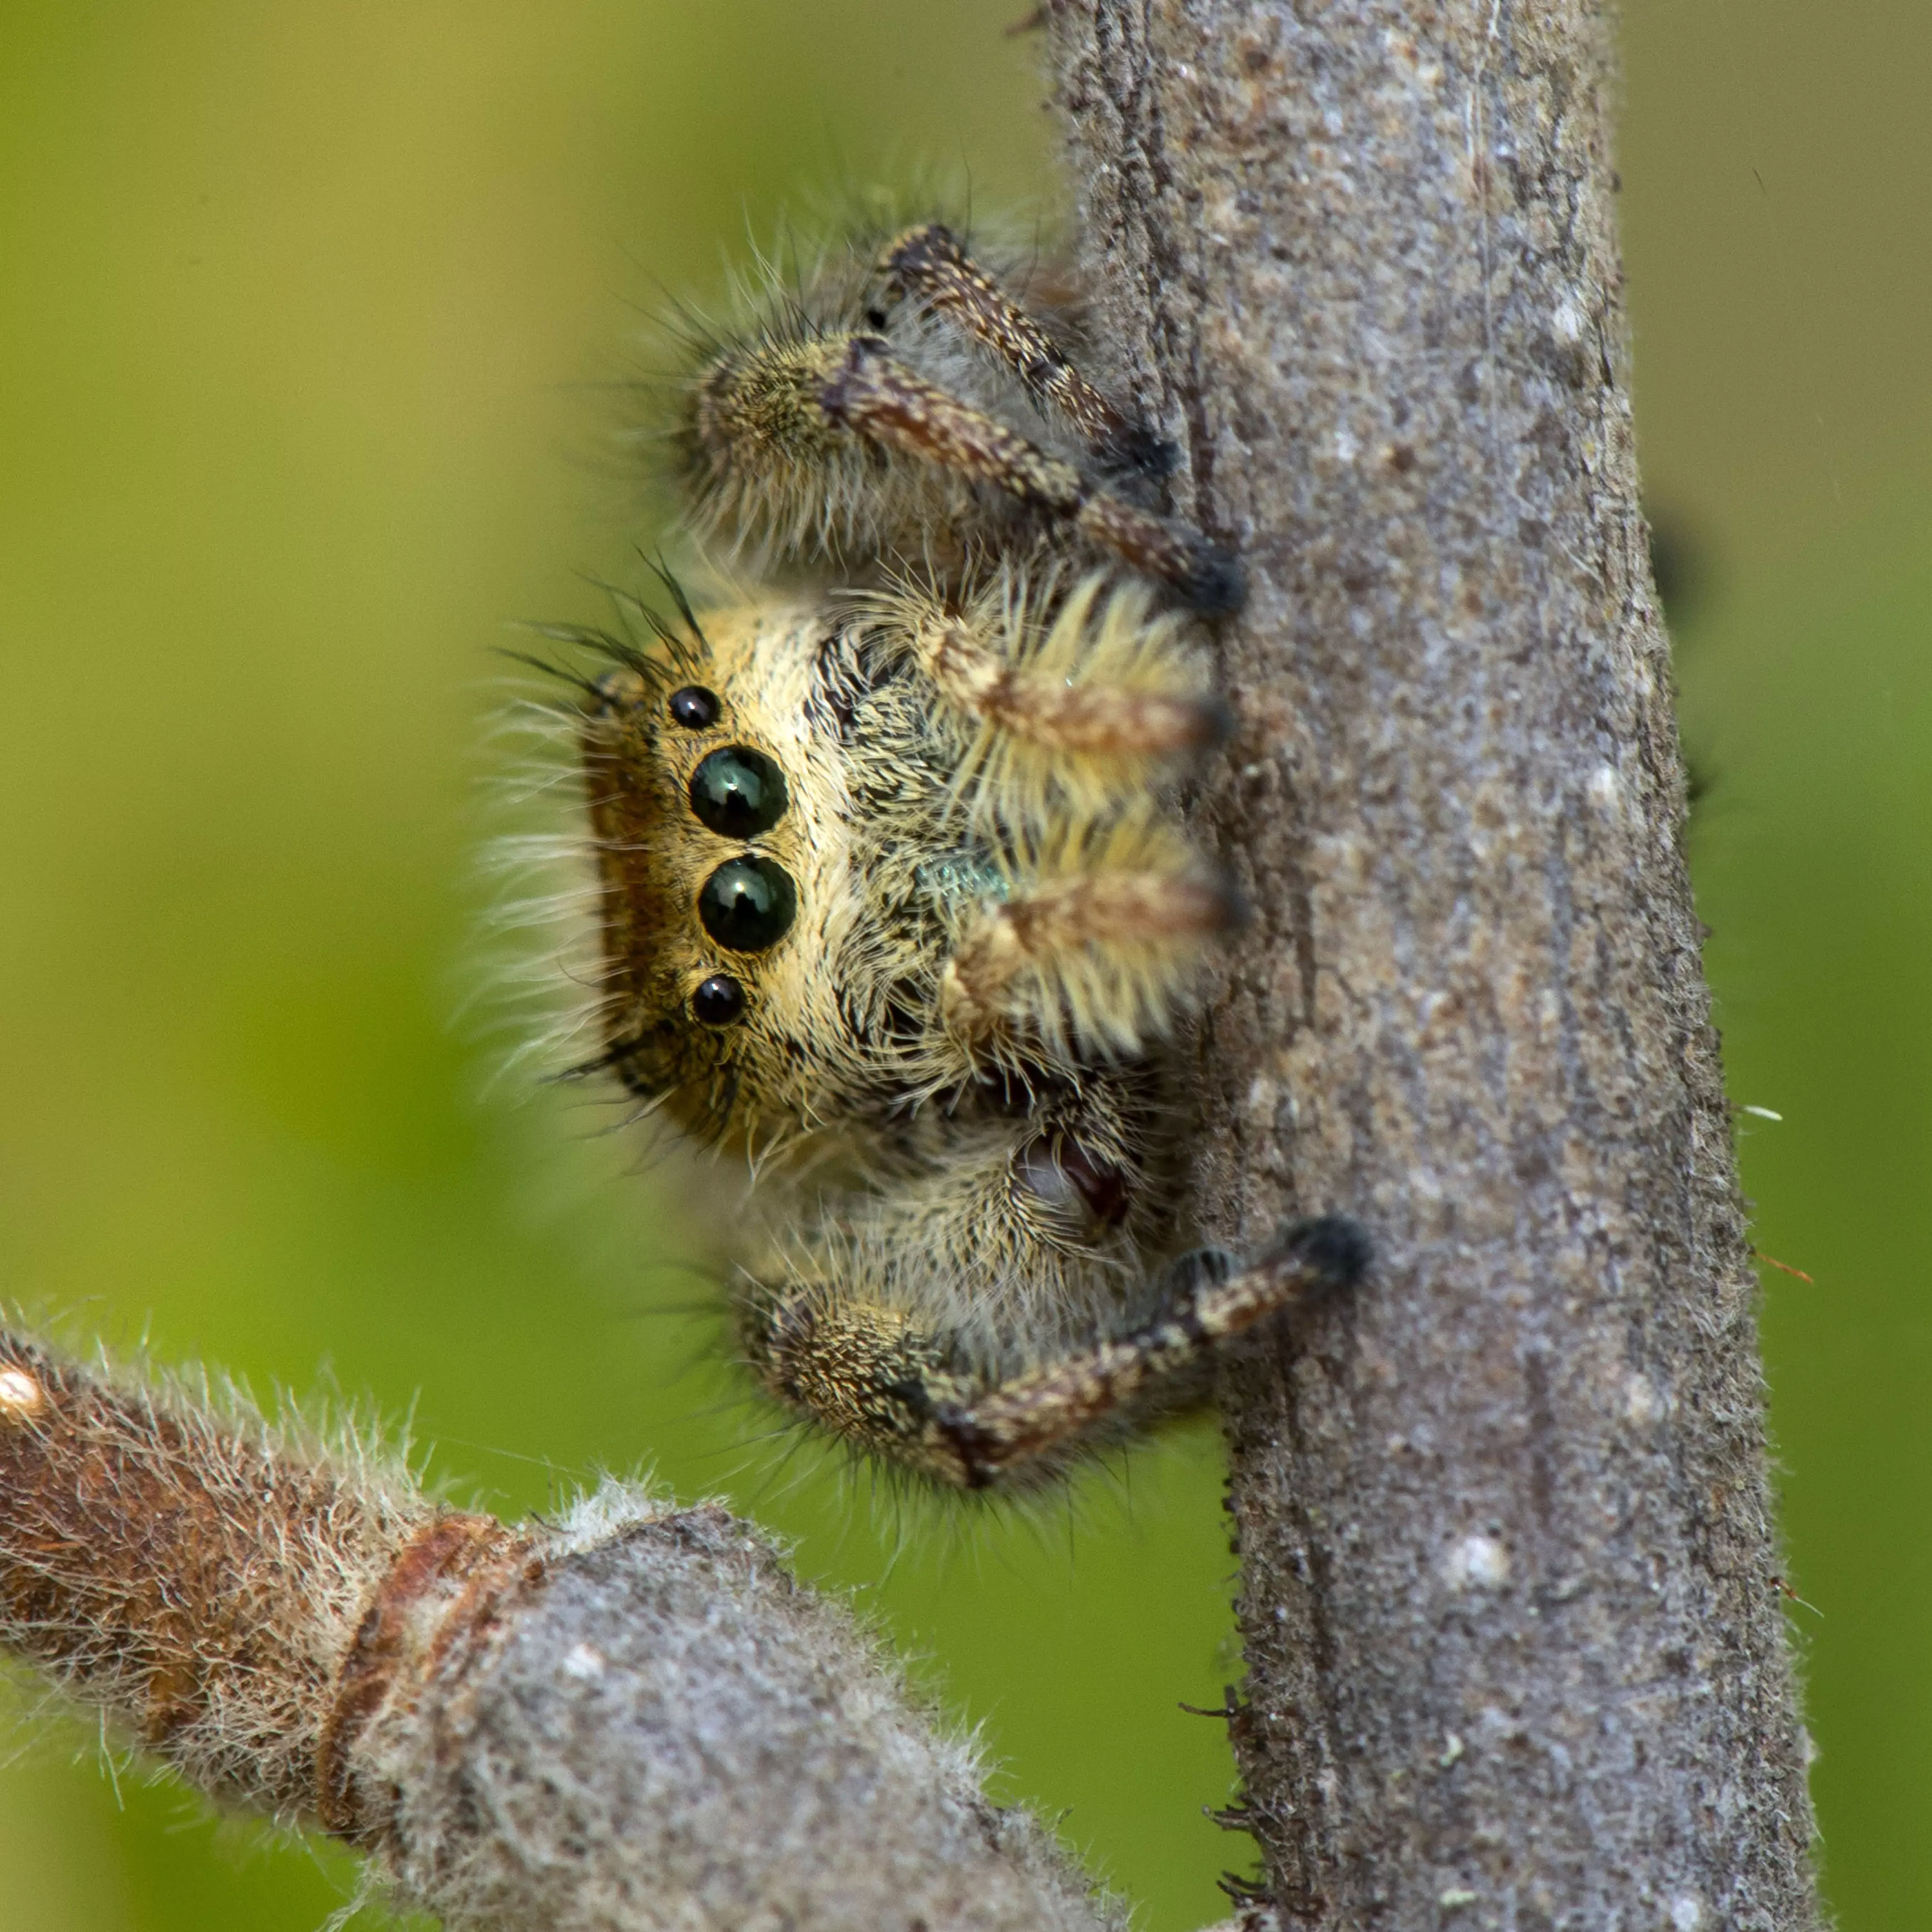 The large jumping spider. Cute, isn't it?